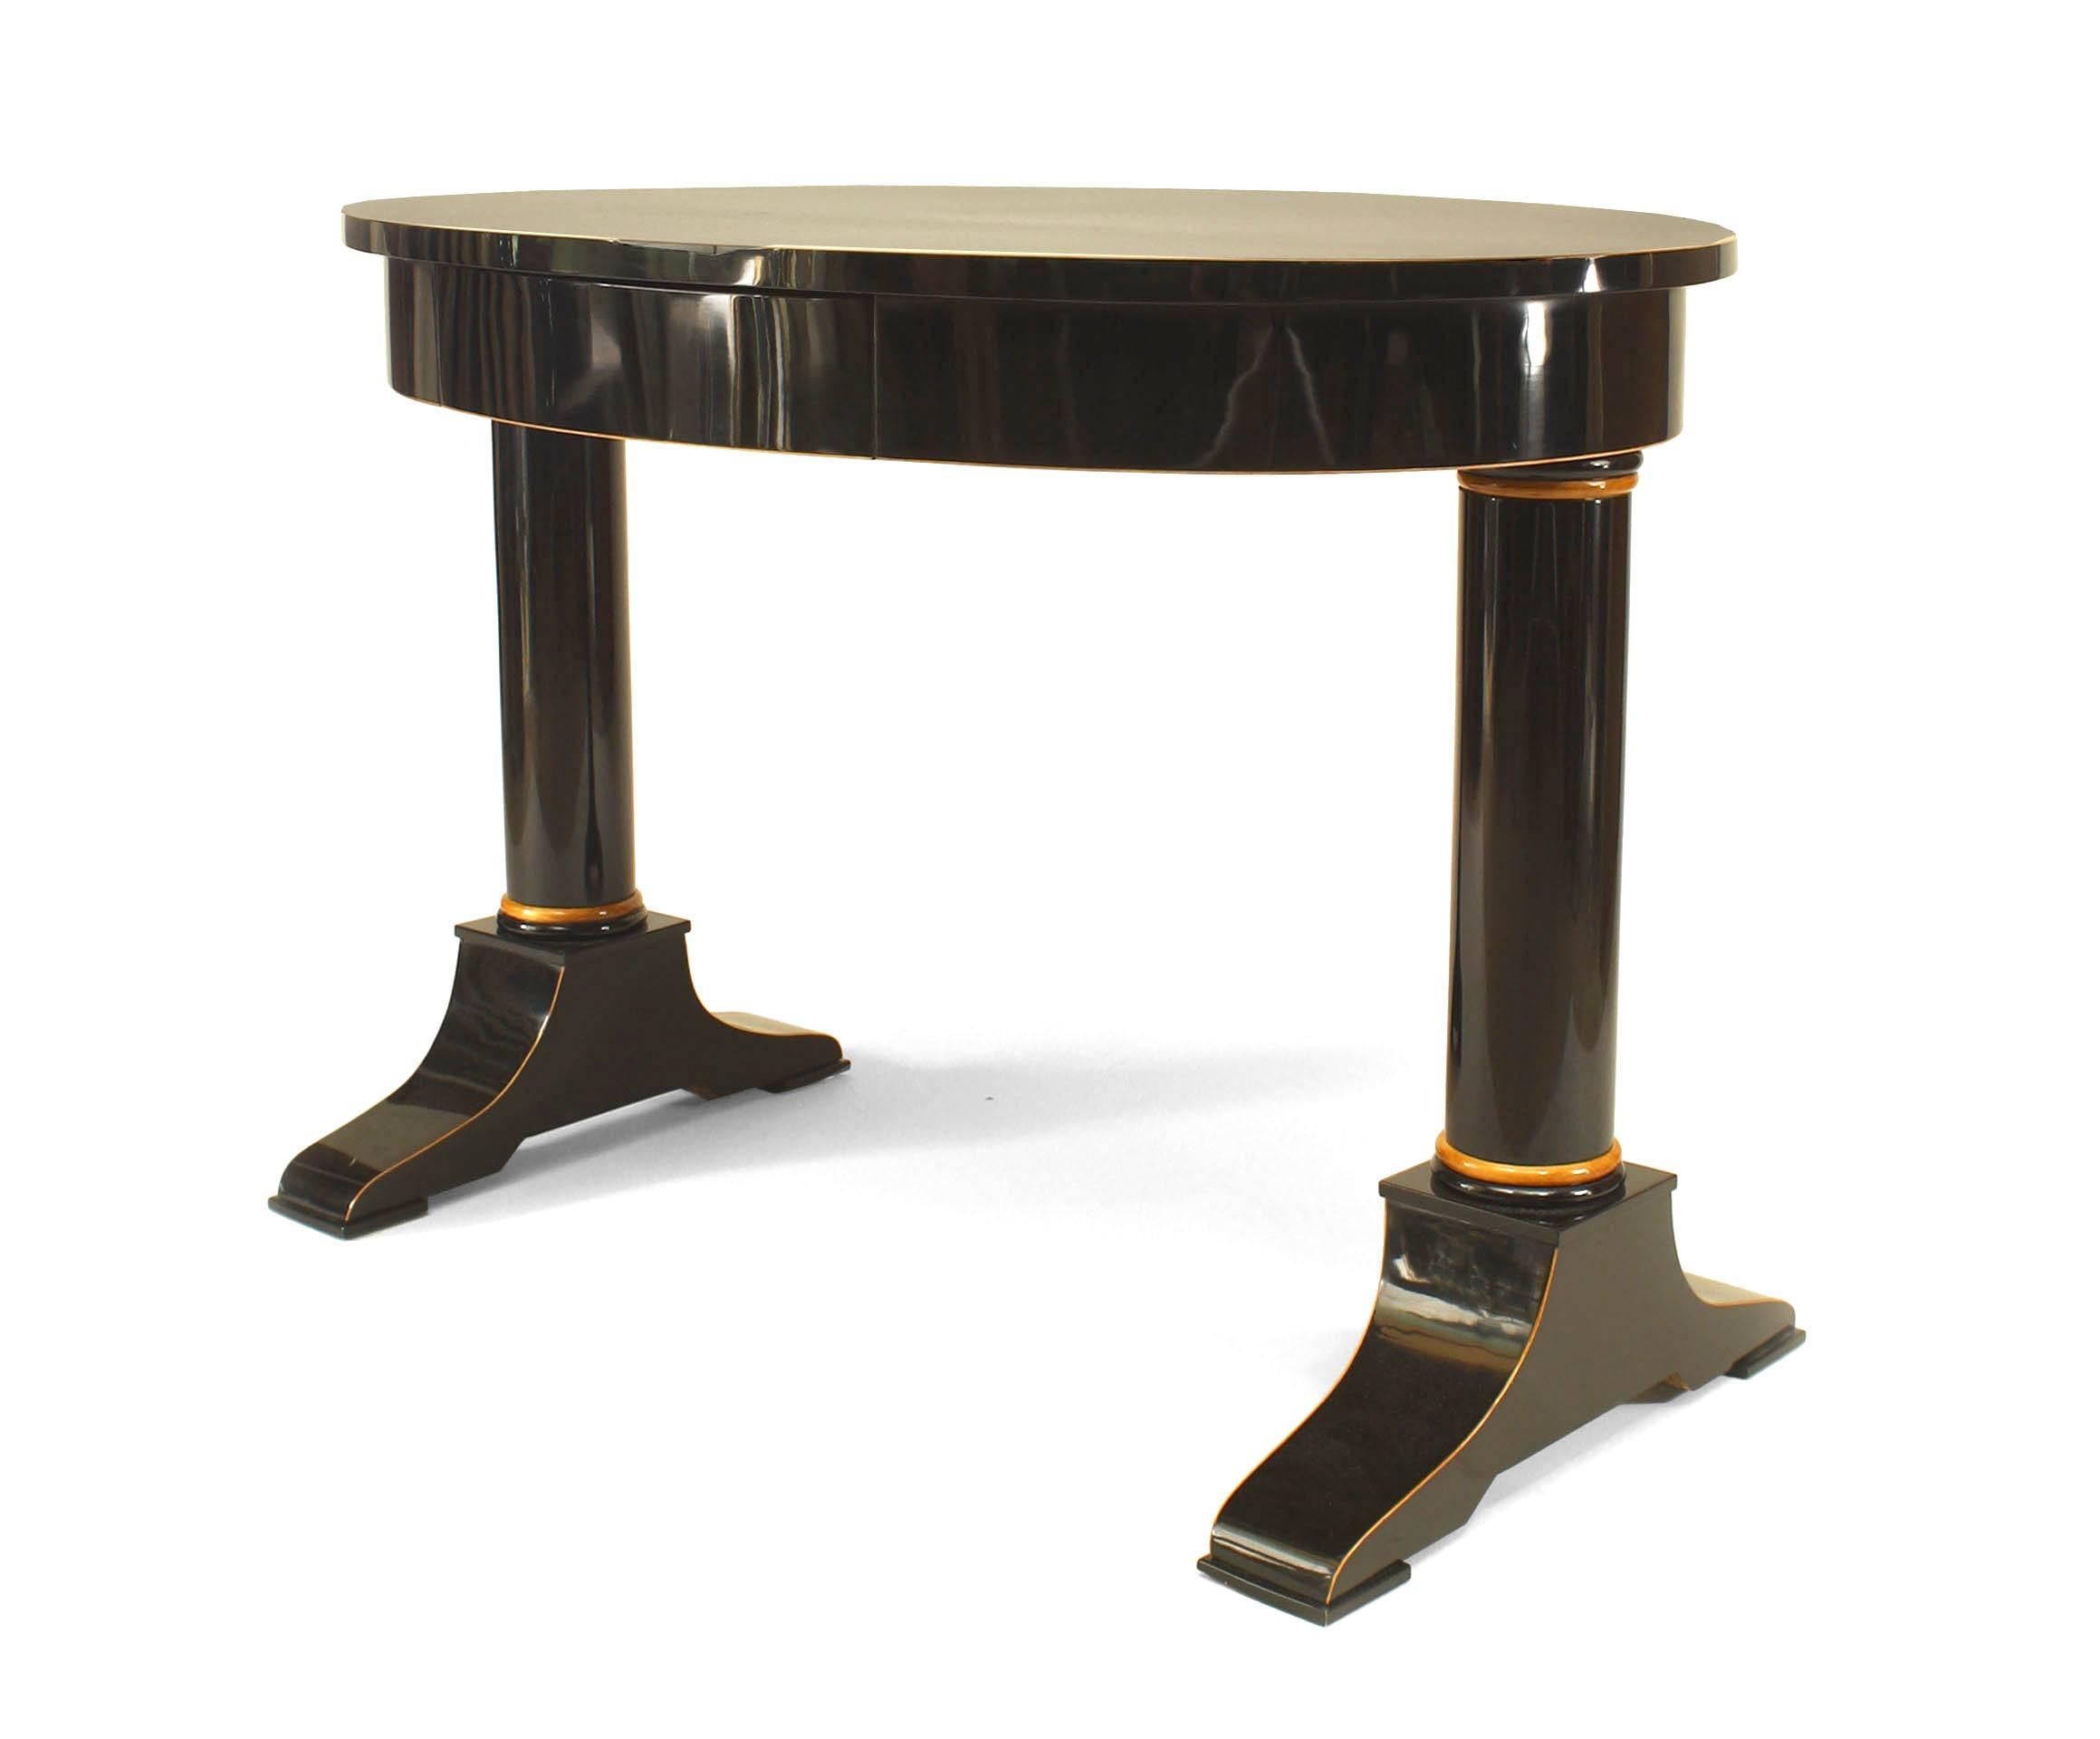 Austrian Biedermeier (circa 1825) ebonized oval top table desk with maple trim and pearwood inlaid banding and supported on 2 columns with a center drawer.
